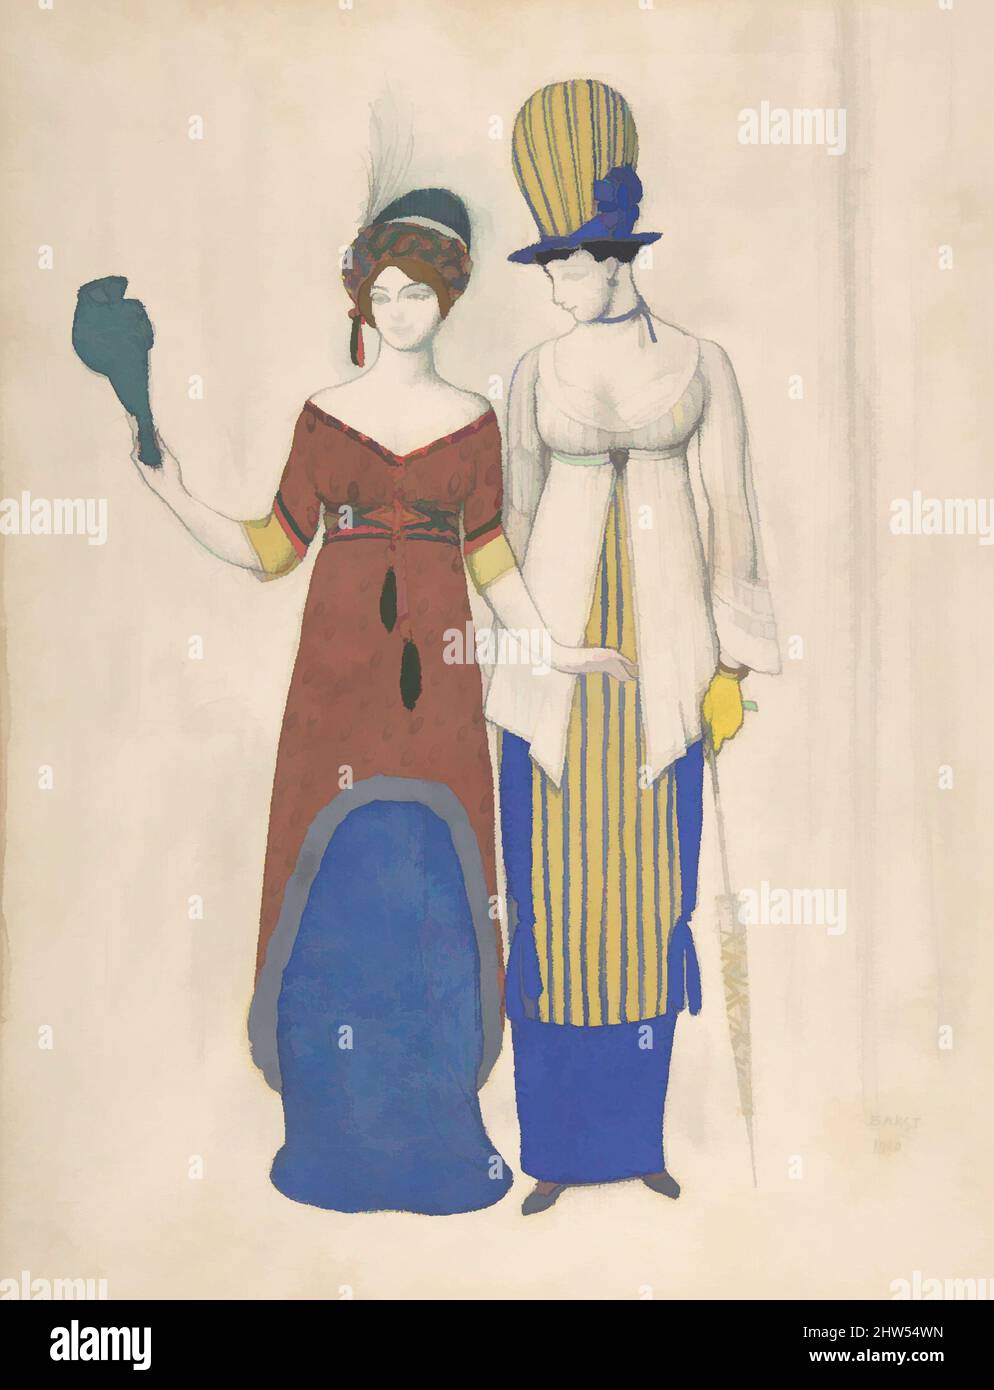 Art inspired by Fantaisie sur le costume moderne': Two female haute couture figures, 1910, Graphite, brush and watercolor and bodycolor, 12 3/4 x 9 3/4 in. (32.4 x 24.8 cm), Léon Bakst (Russian, Grodno 1866–1924 Paris), Drawing with two female figures, dressed in haute couture garments, Classic works modernized by Artotop with a splash of modernity. Shapes, color and value, eye-catching visual impact on art. Emotions through freedom of artworks in a contemporary way. A timeless message pursuing a wildly creative new direction. Artists turning to the digital medium and creating the Artotop NFT Stock Photo